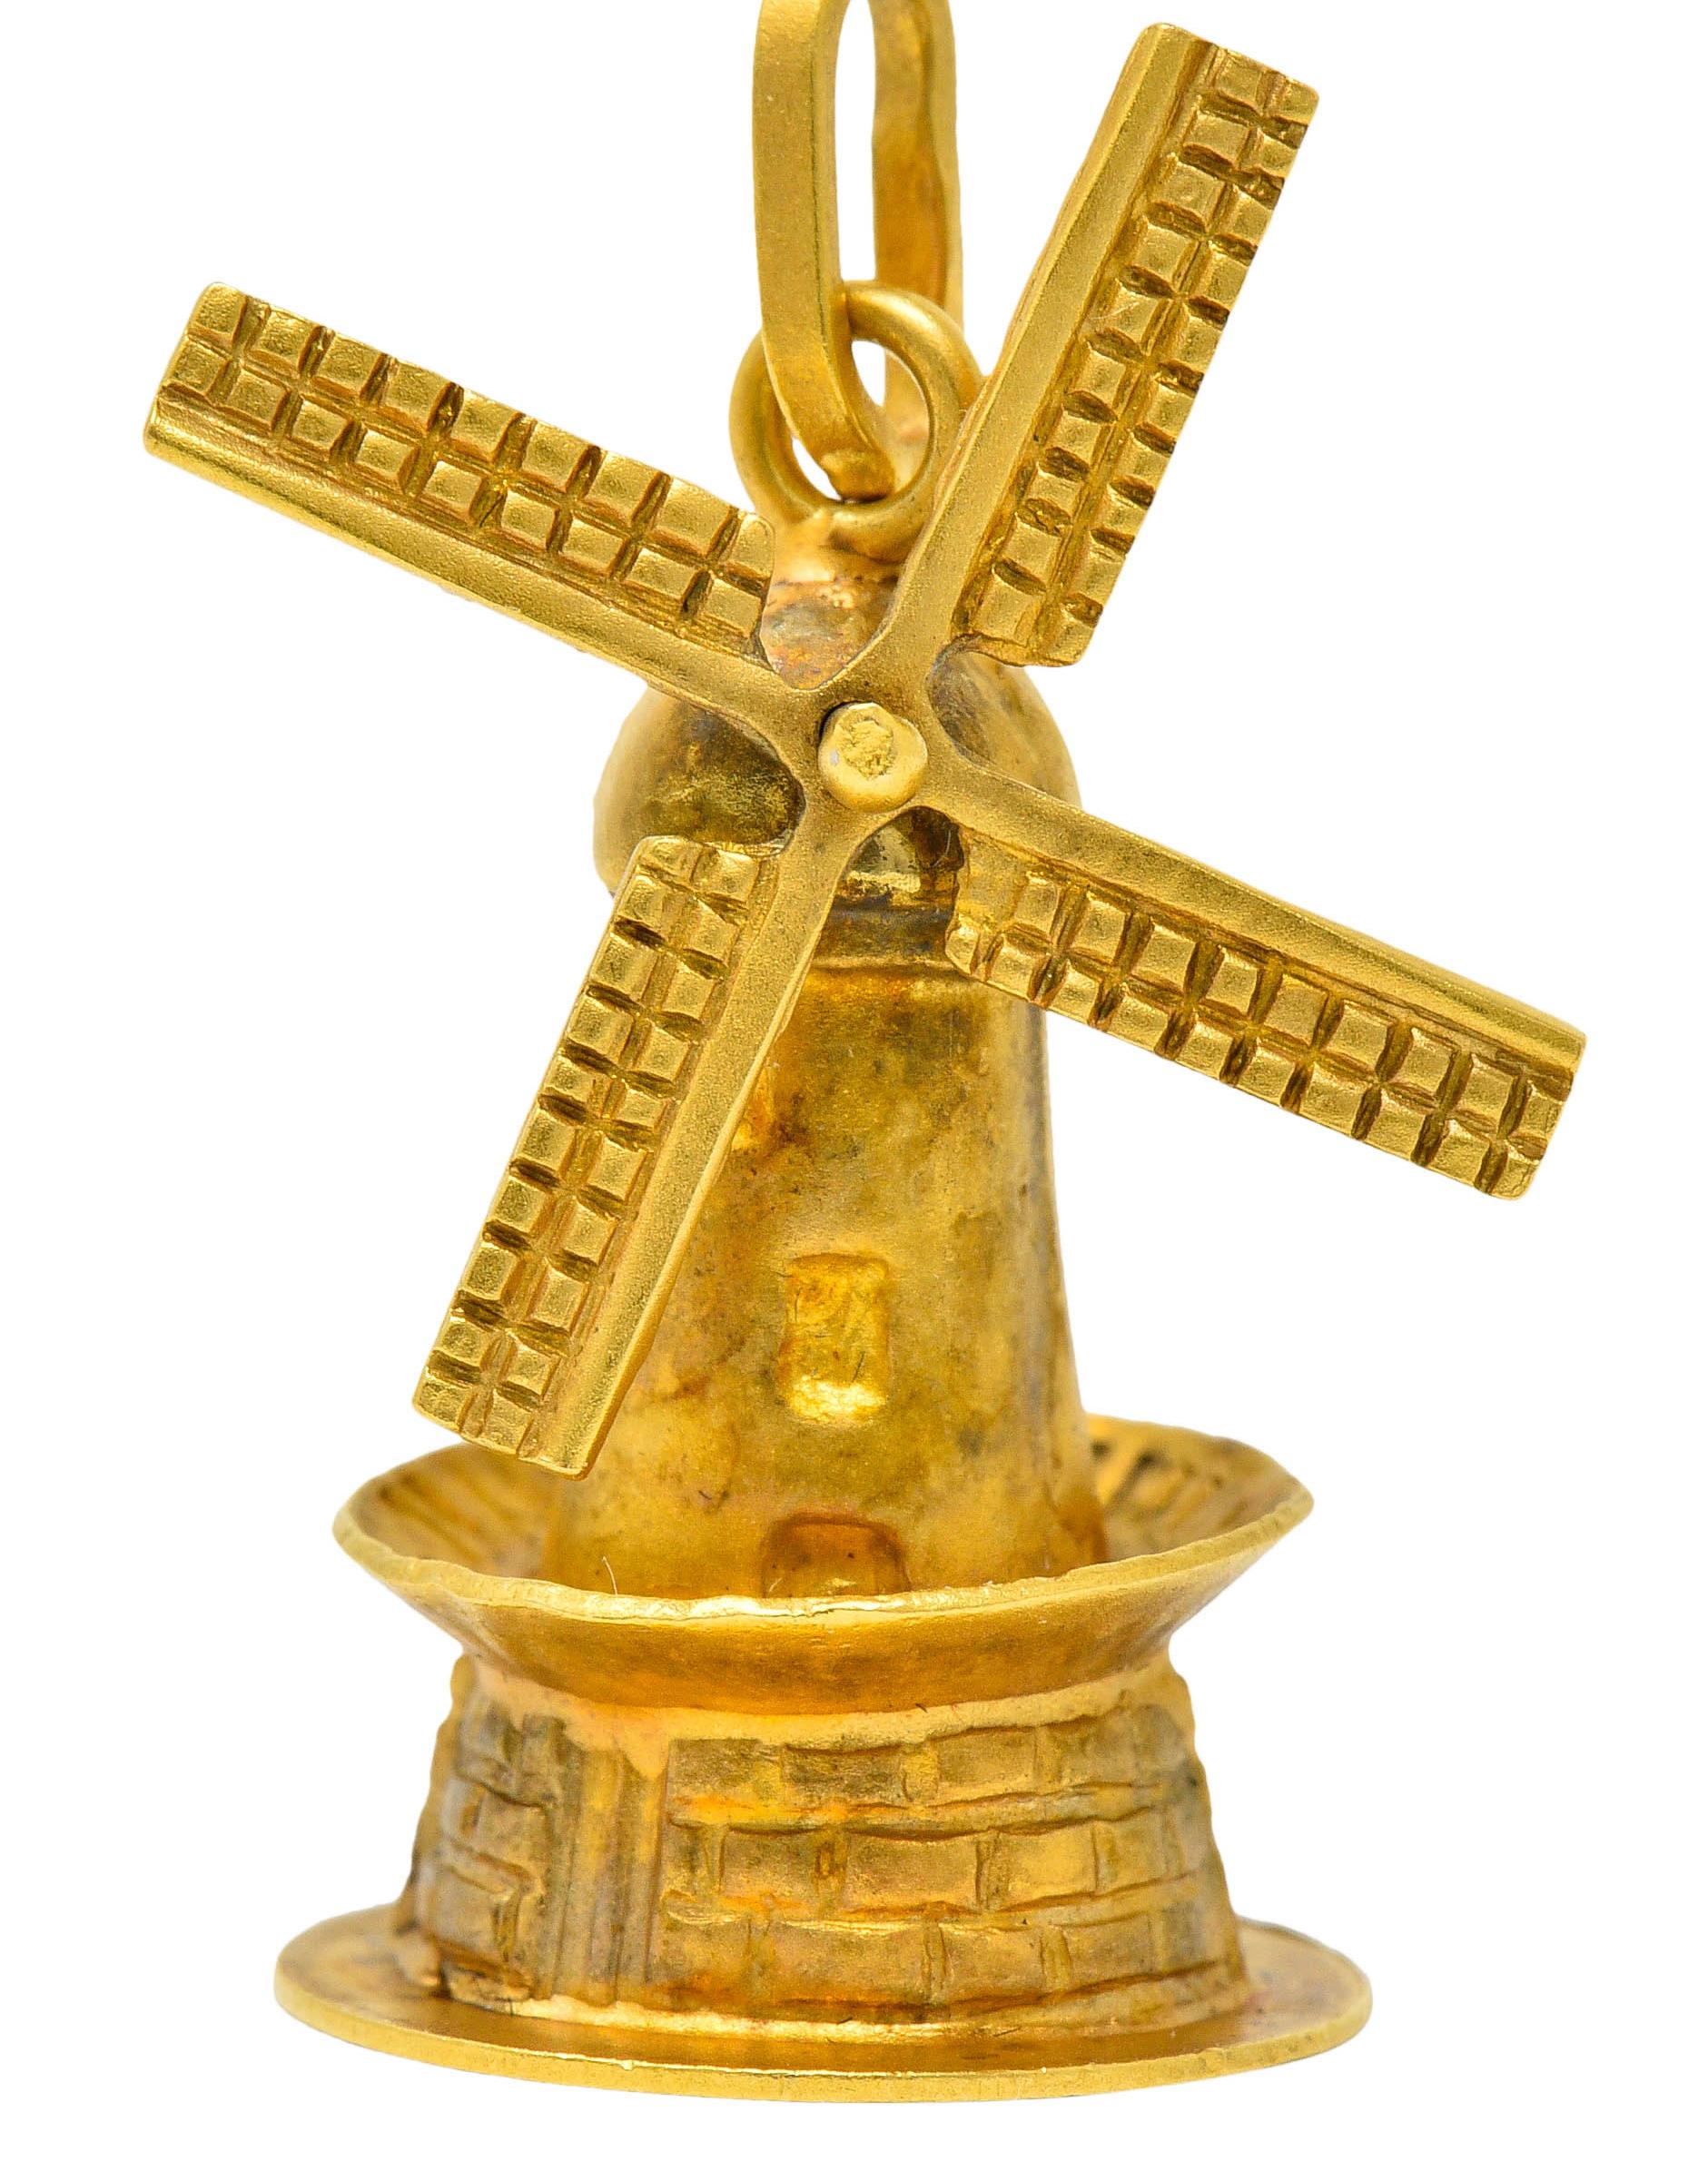 Substantially sized charm designed as a matte gold Dutch windmill

With a rotating propellers, deeply engraved with a checkerboard motif

Smooth tower with a base as highly rendered brick

Completed by jump ring bale

Circa: 1950s

Stamped K18 for